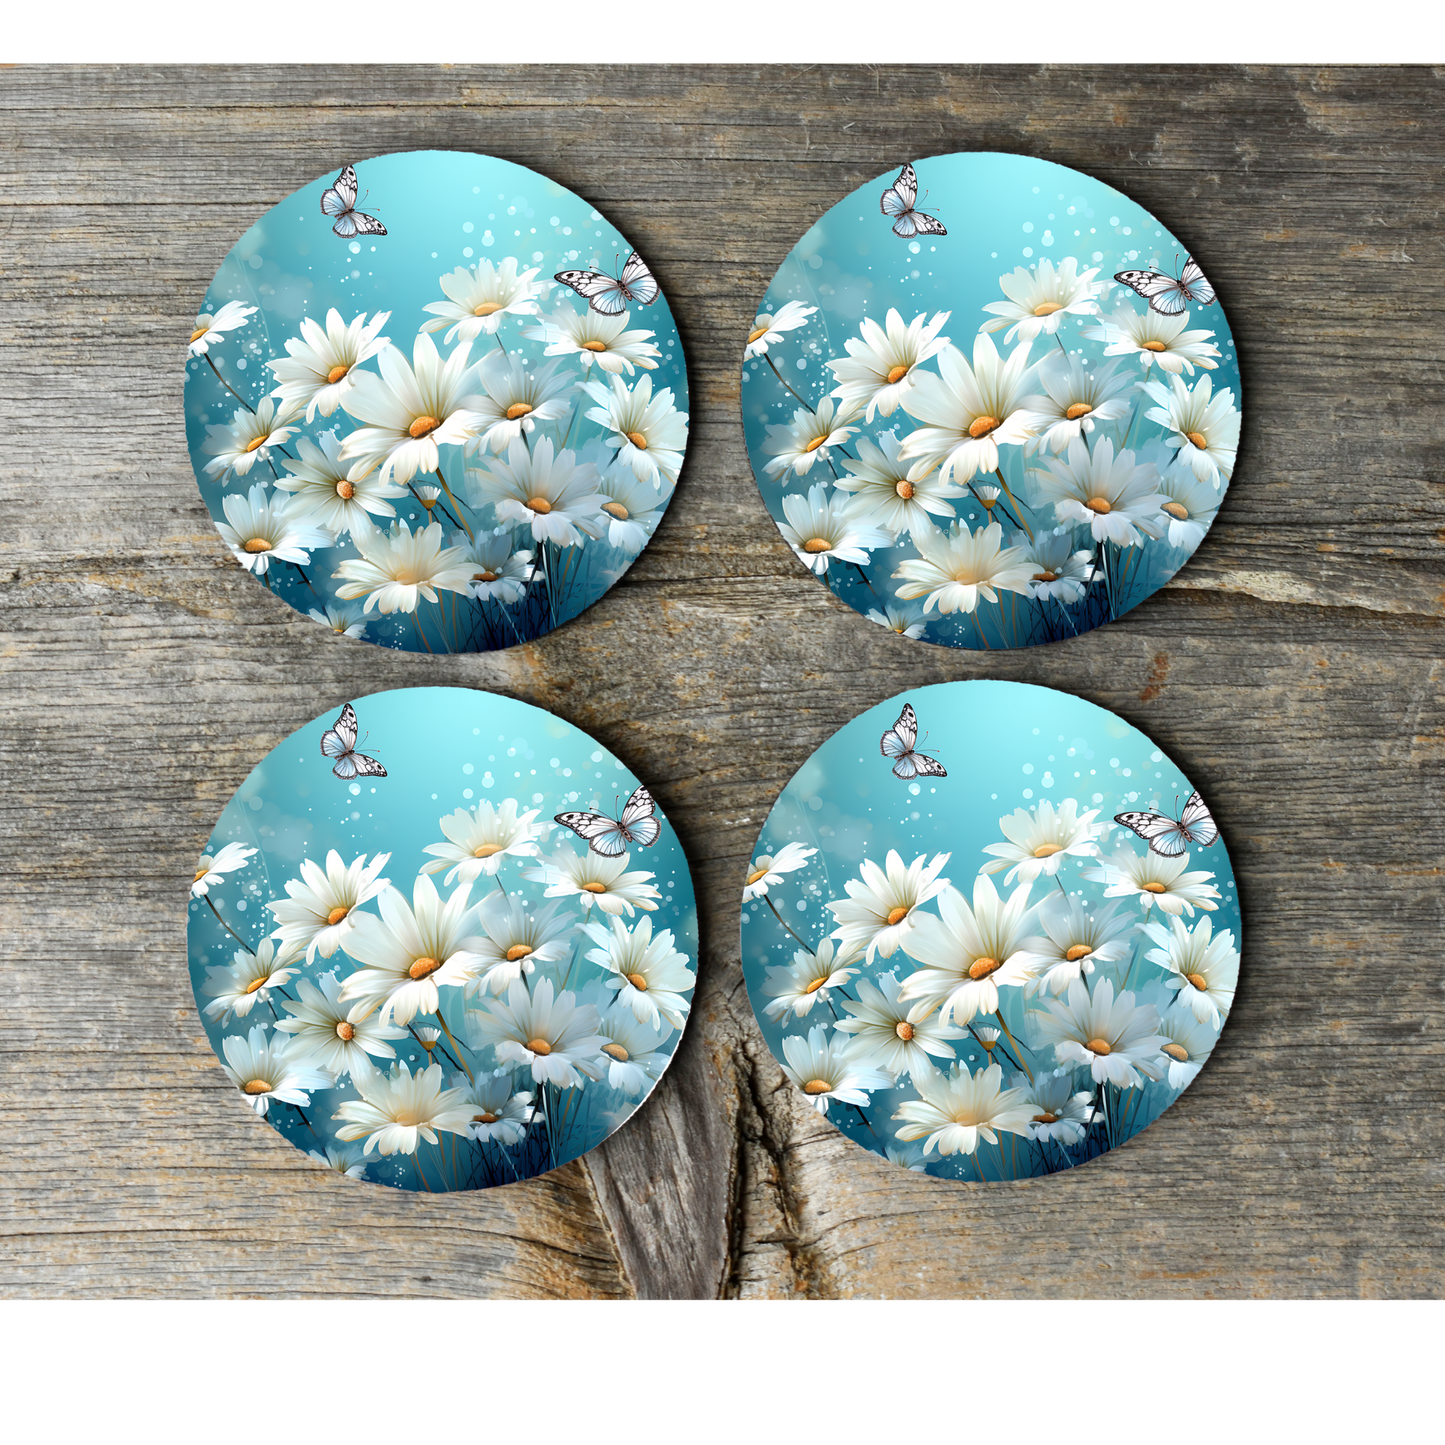 Enchanted Delicate Daisy Round Cork Backed Wooden Coasters - Eco-Friendly and Stylish Drink Mats